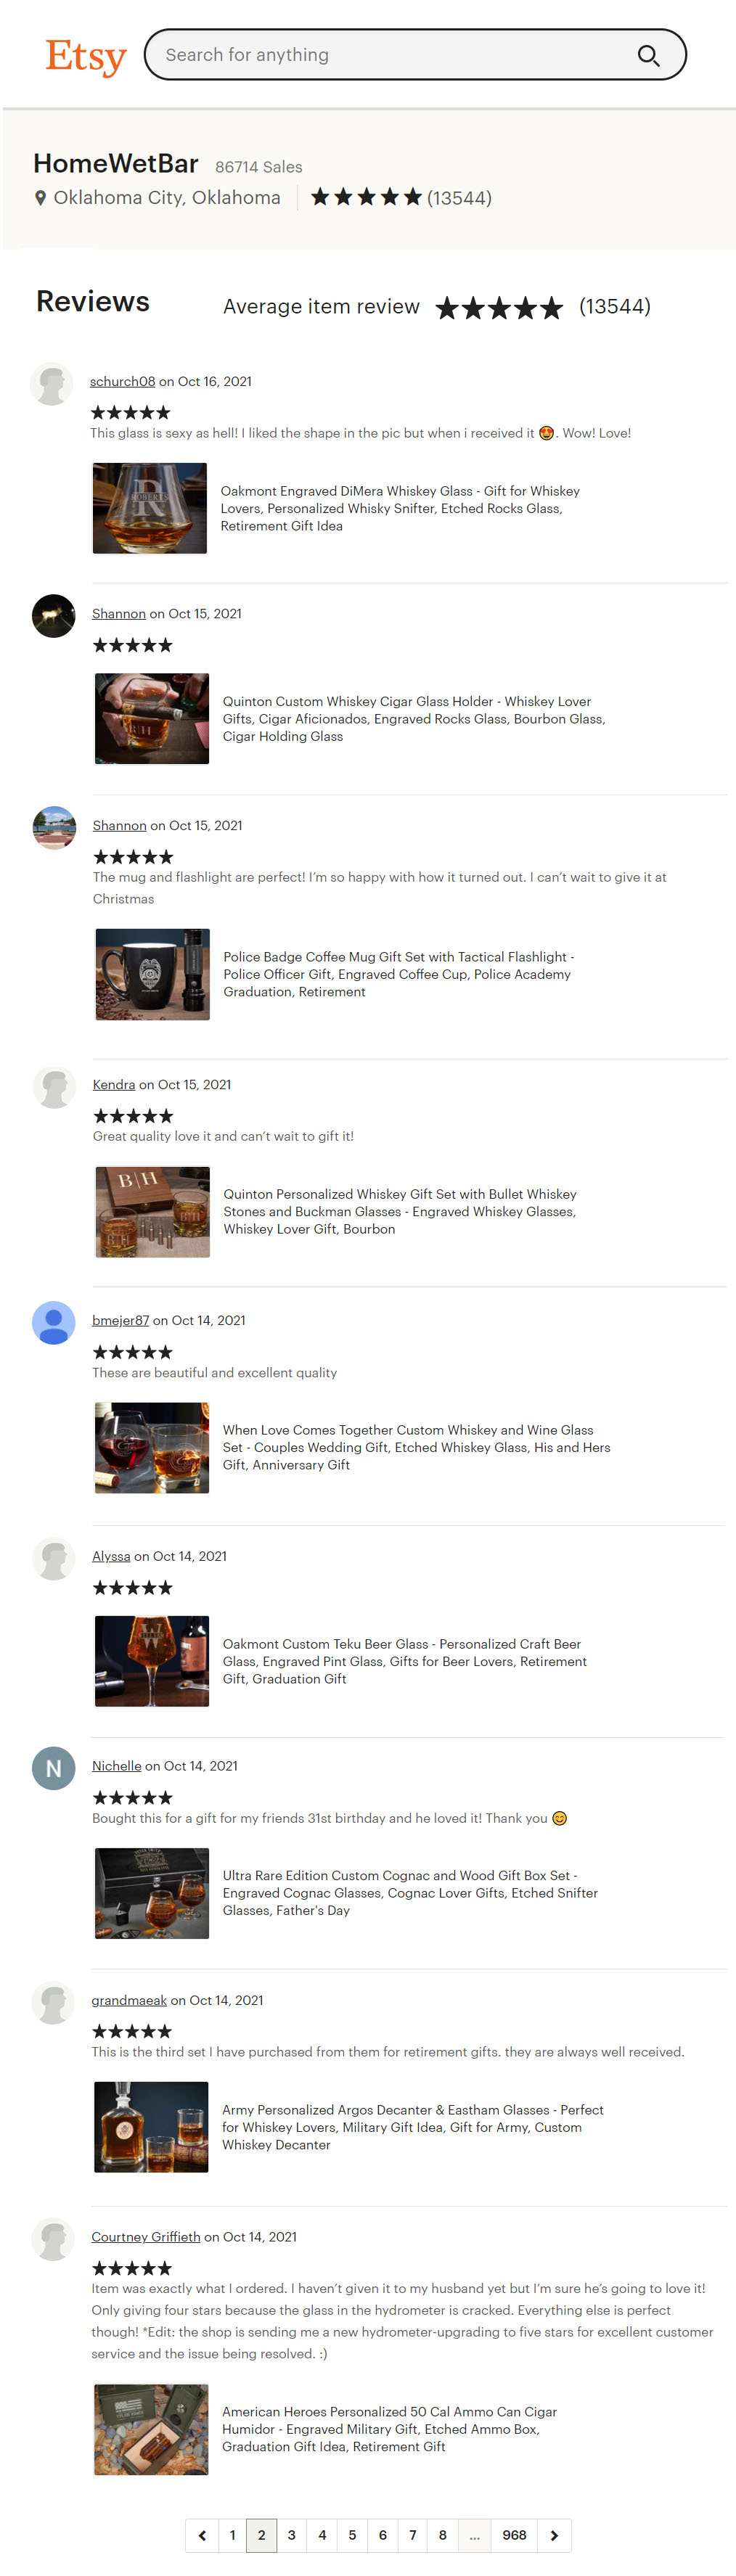 homewetbar reviews rated by real customers on Etsy